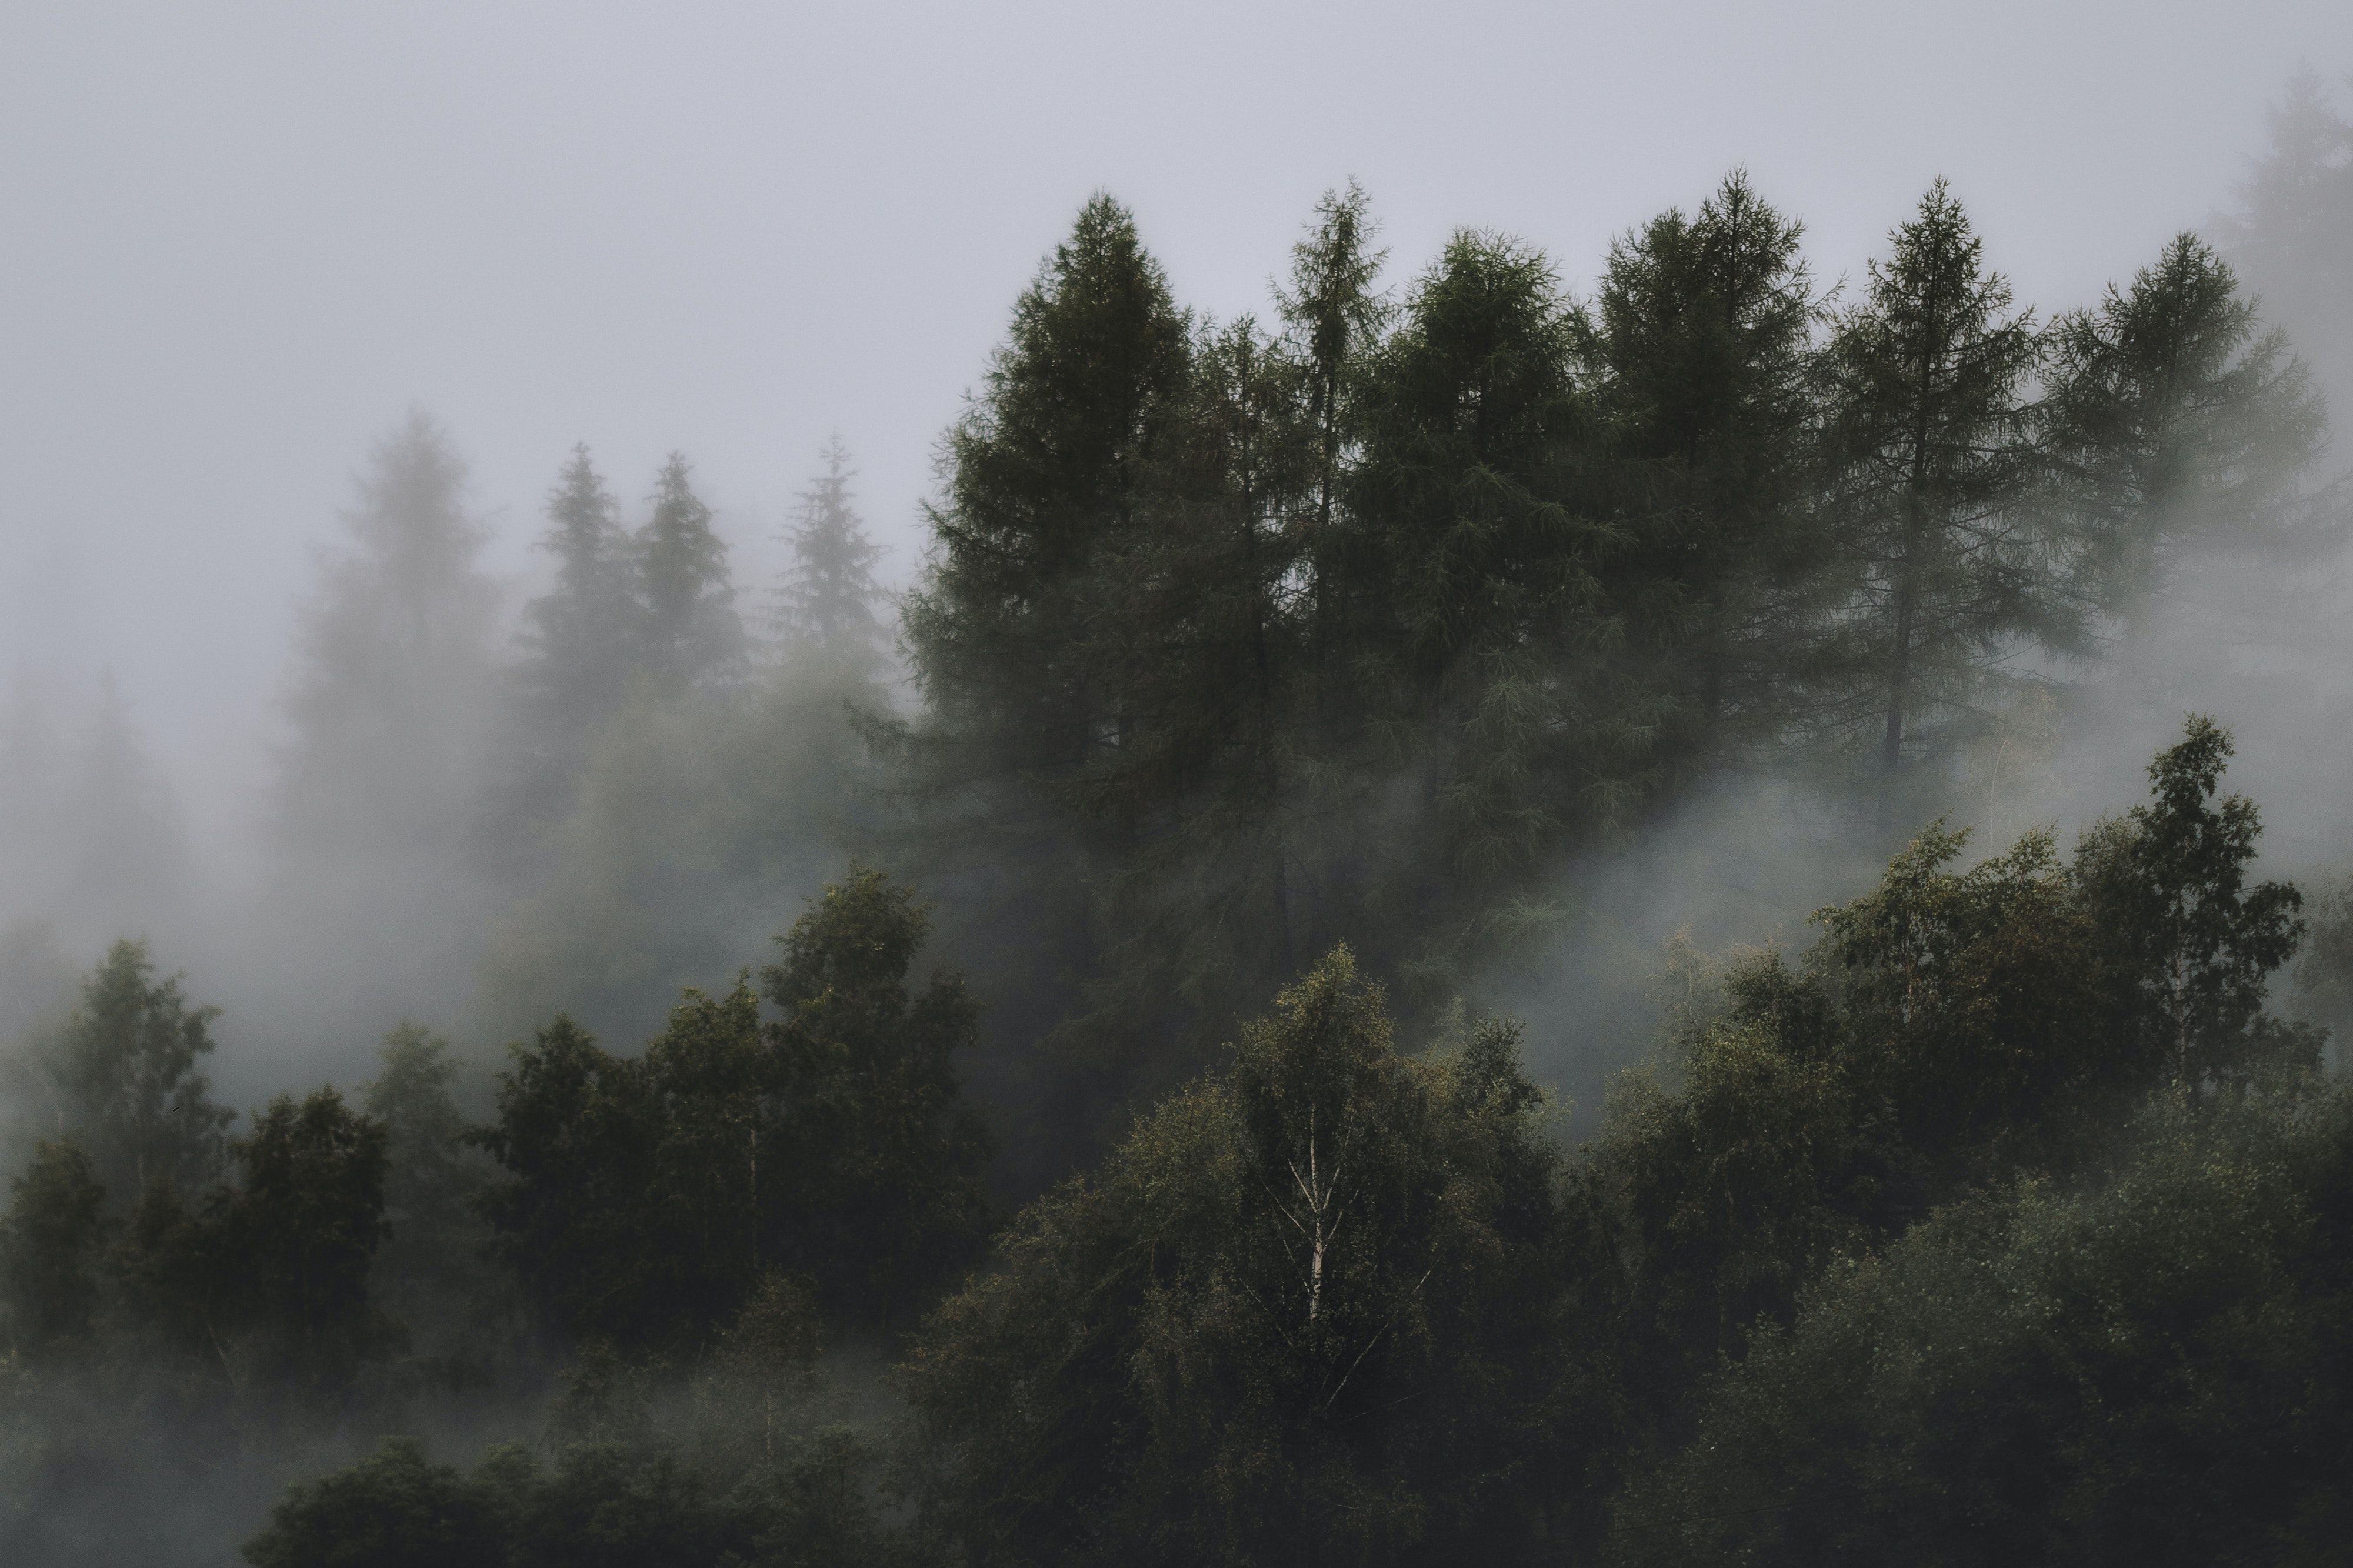 A forest of trees with fog surrounding them. - Foggy forest